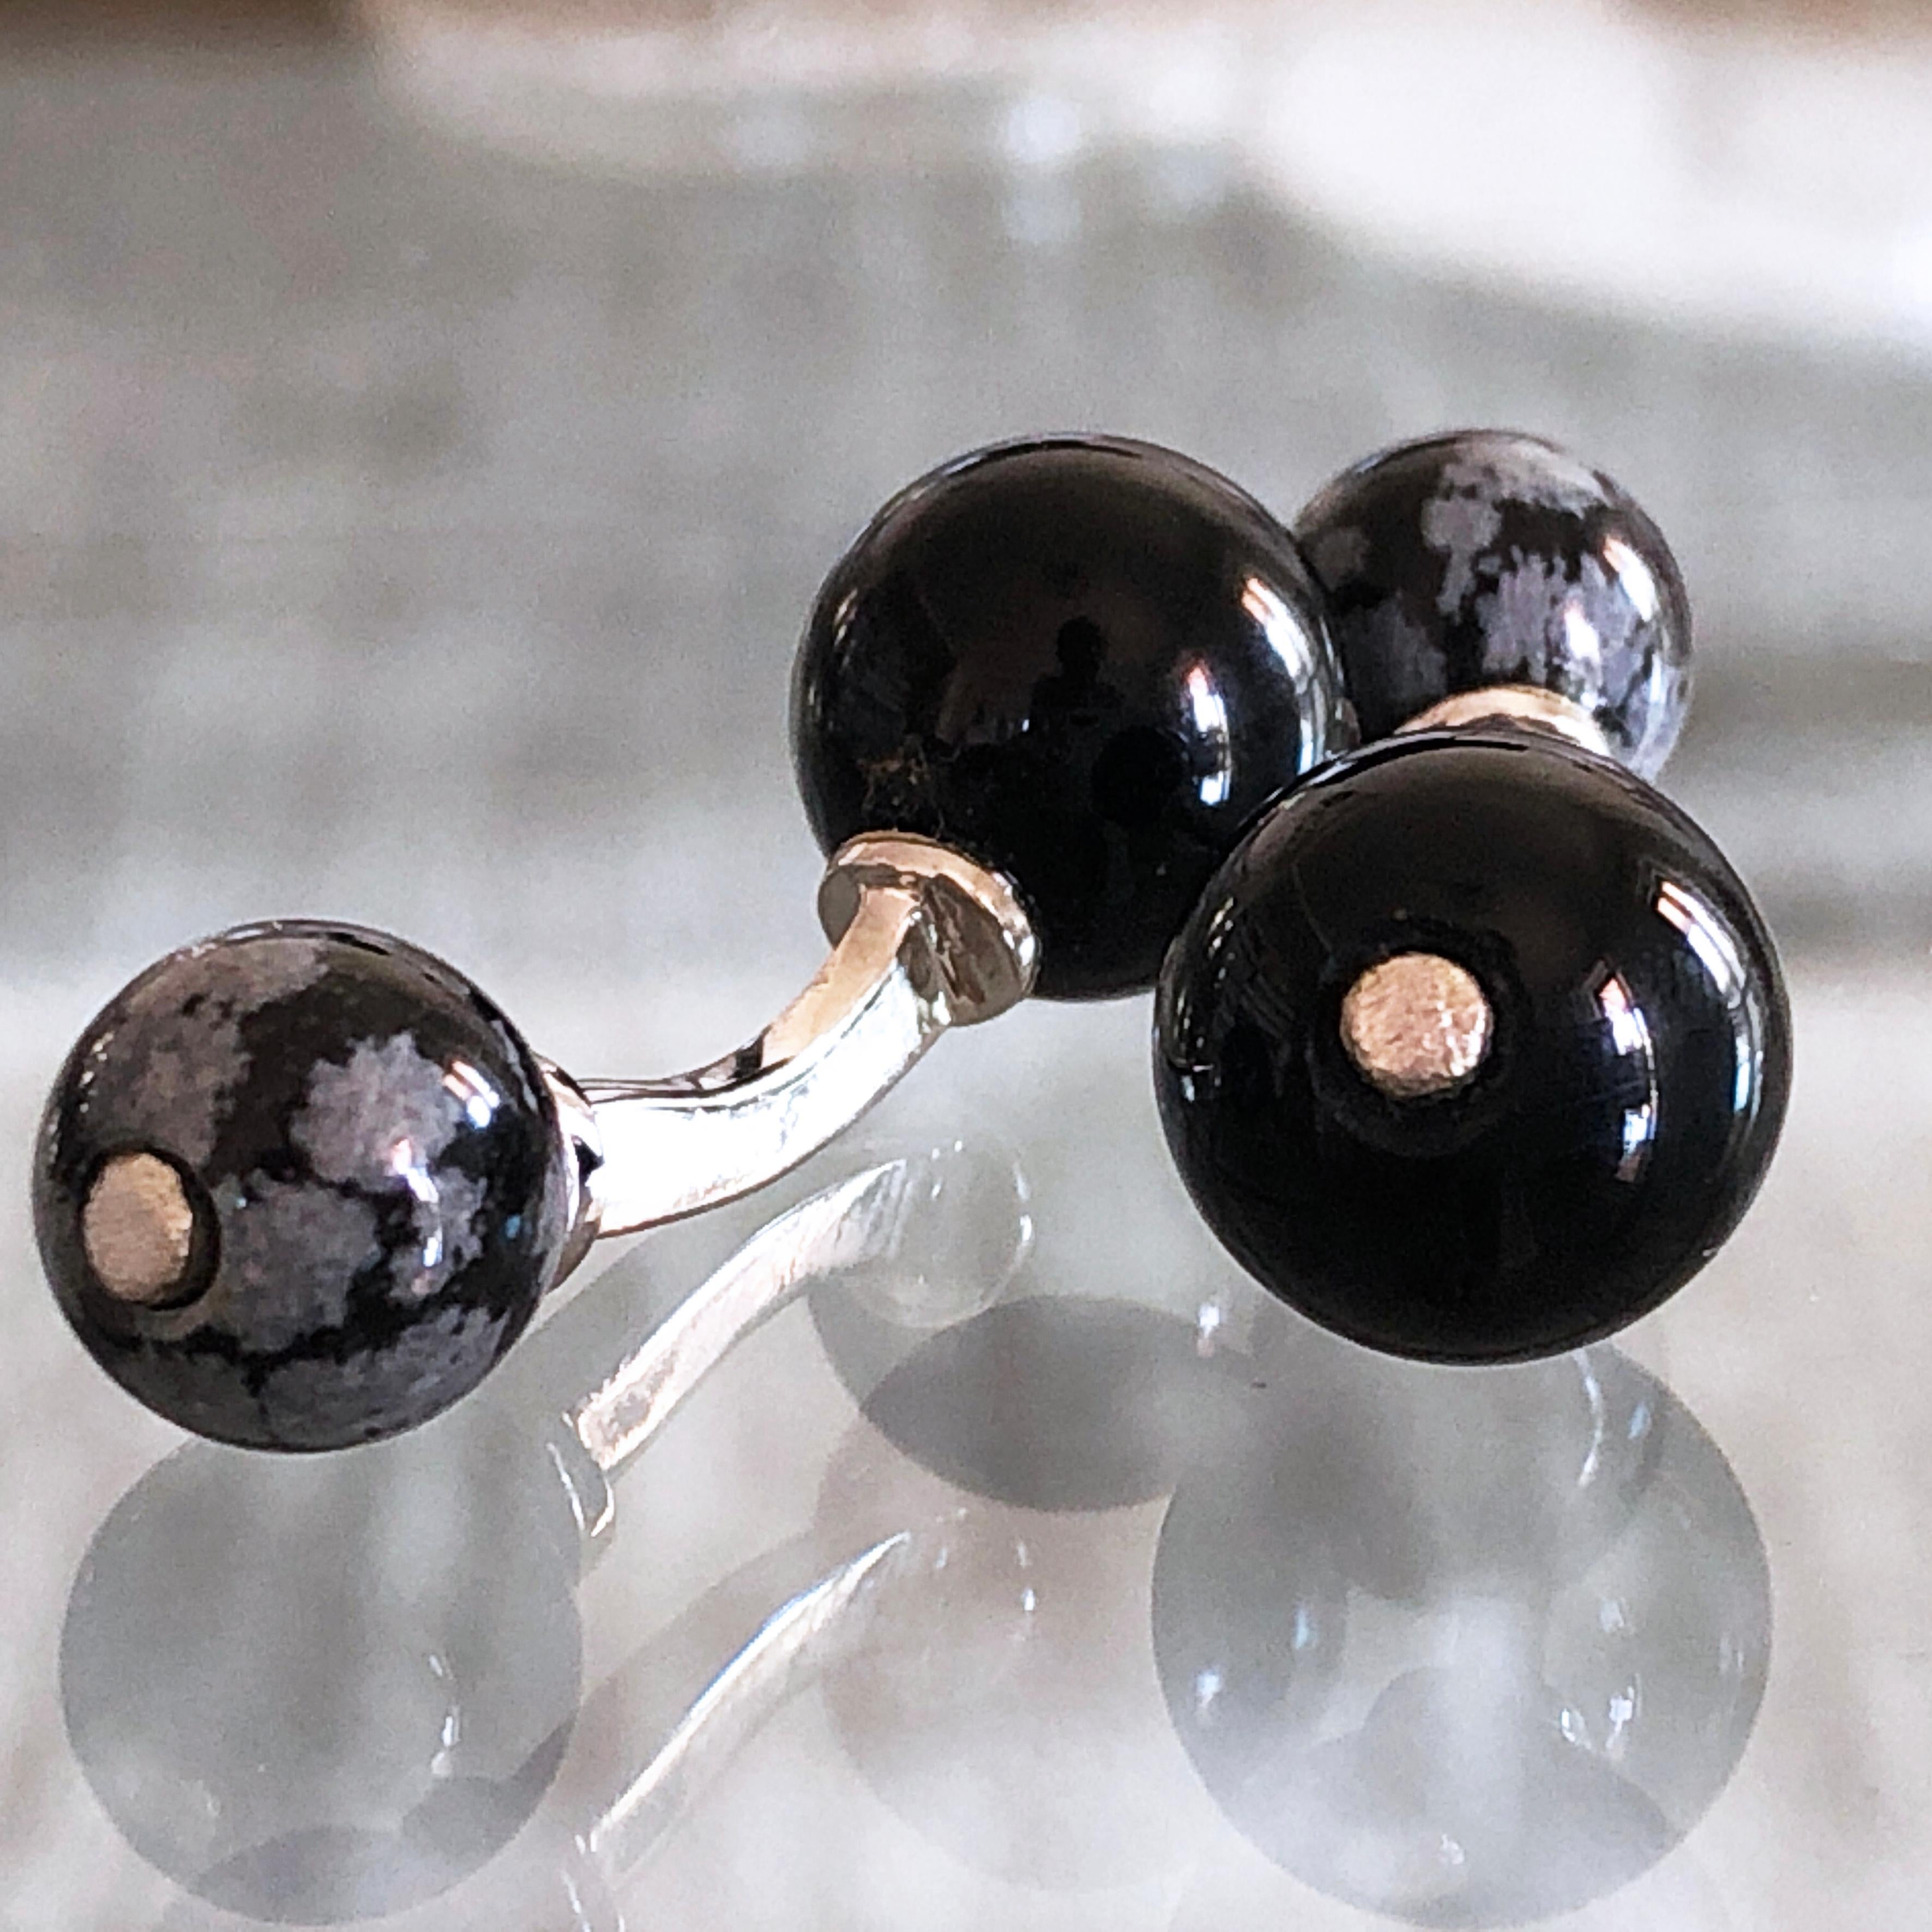 Unique, Chic, Hand Inlaid Natural Onyx and Cloudy Onyx Little Ball Sterling Silver Cufflinks.

In our Smart Black Box and Pouch.
